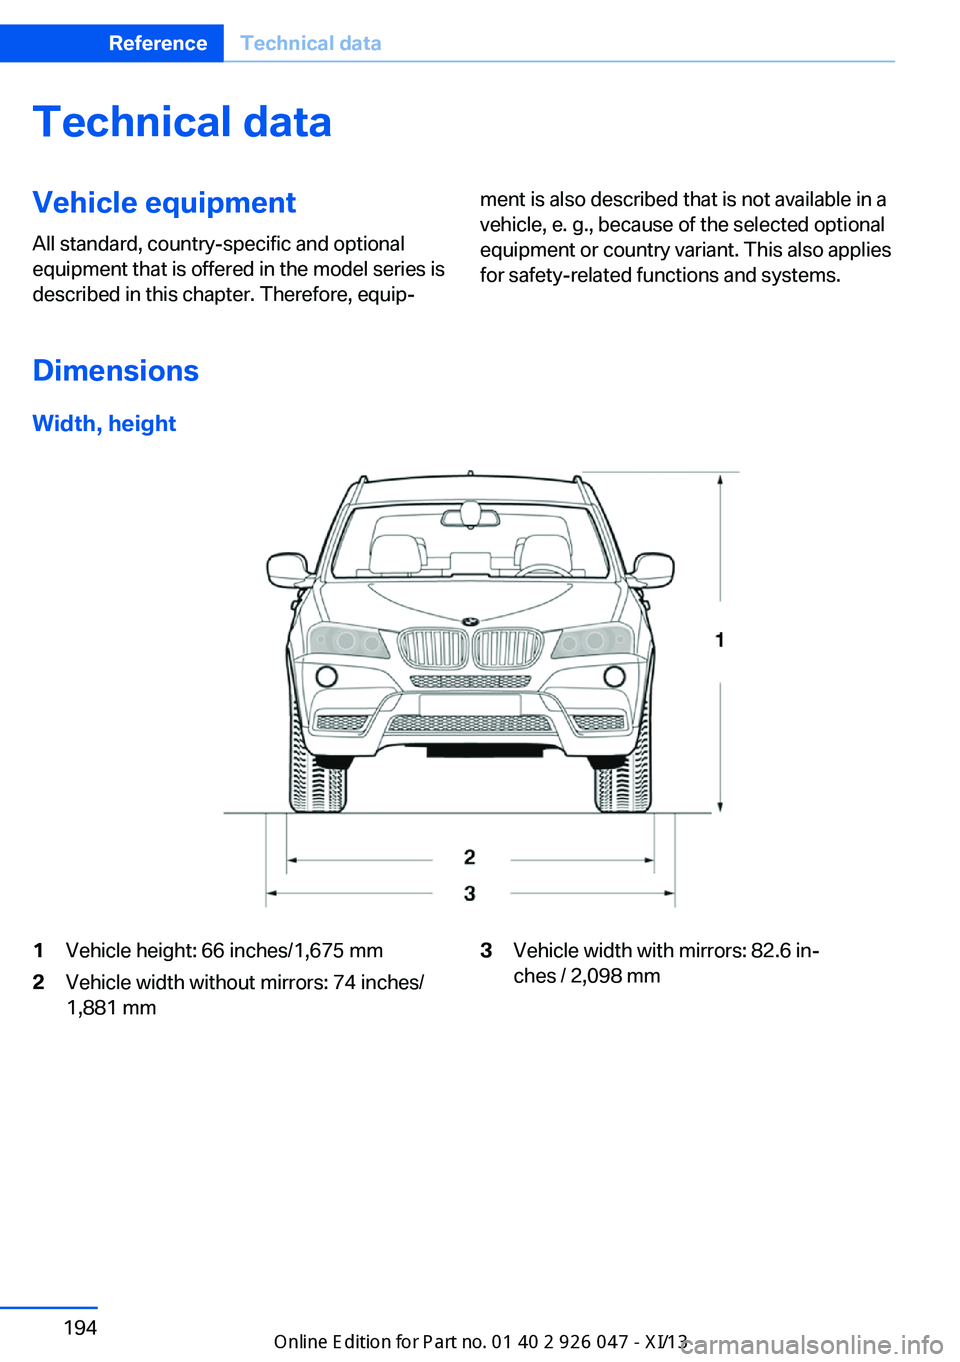 BMW X3 2013 F25 Owners Manual Technical dataVehicle equipment
All standard, country-specific and optional
equipment that is offered in the model series is
described in this chapter. Therefore, equip‐ment is also described that i